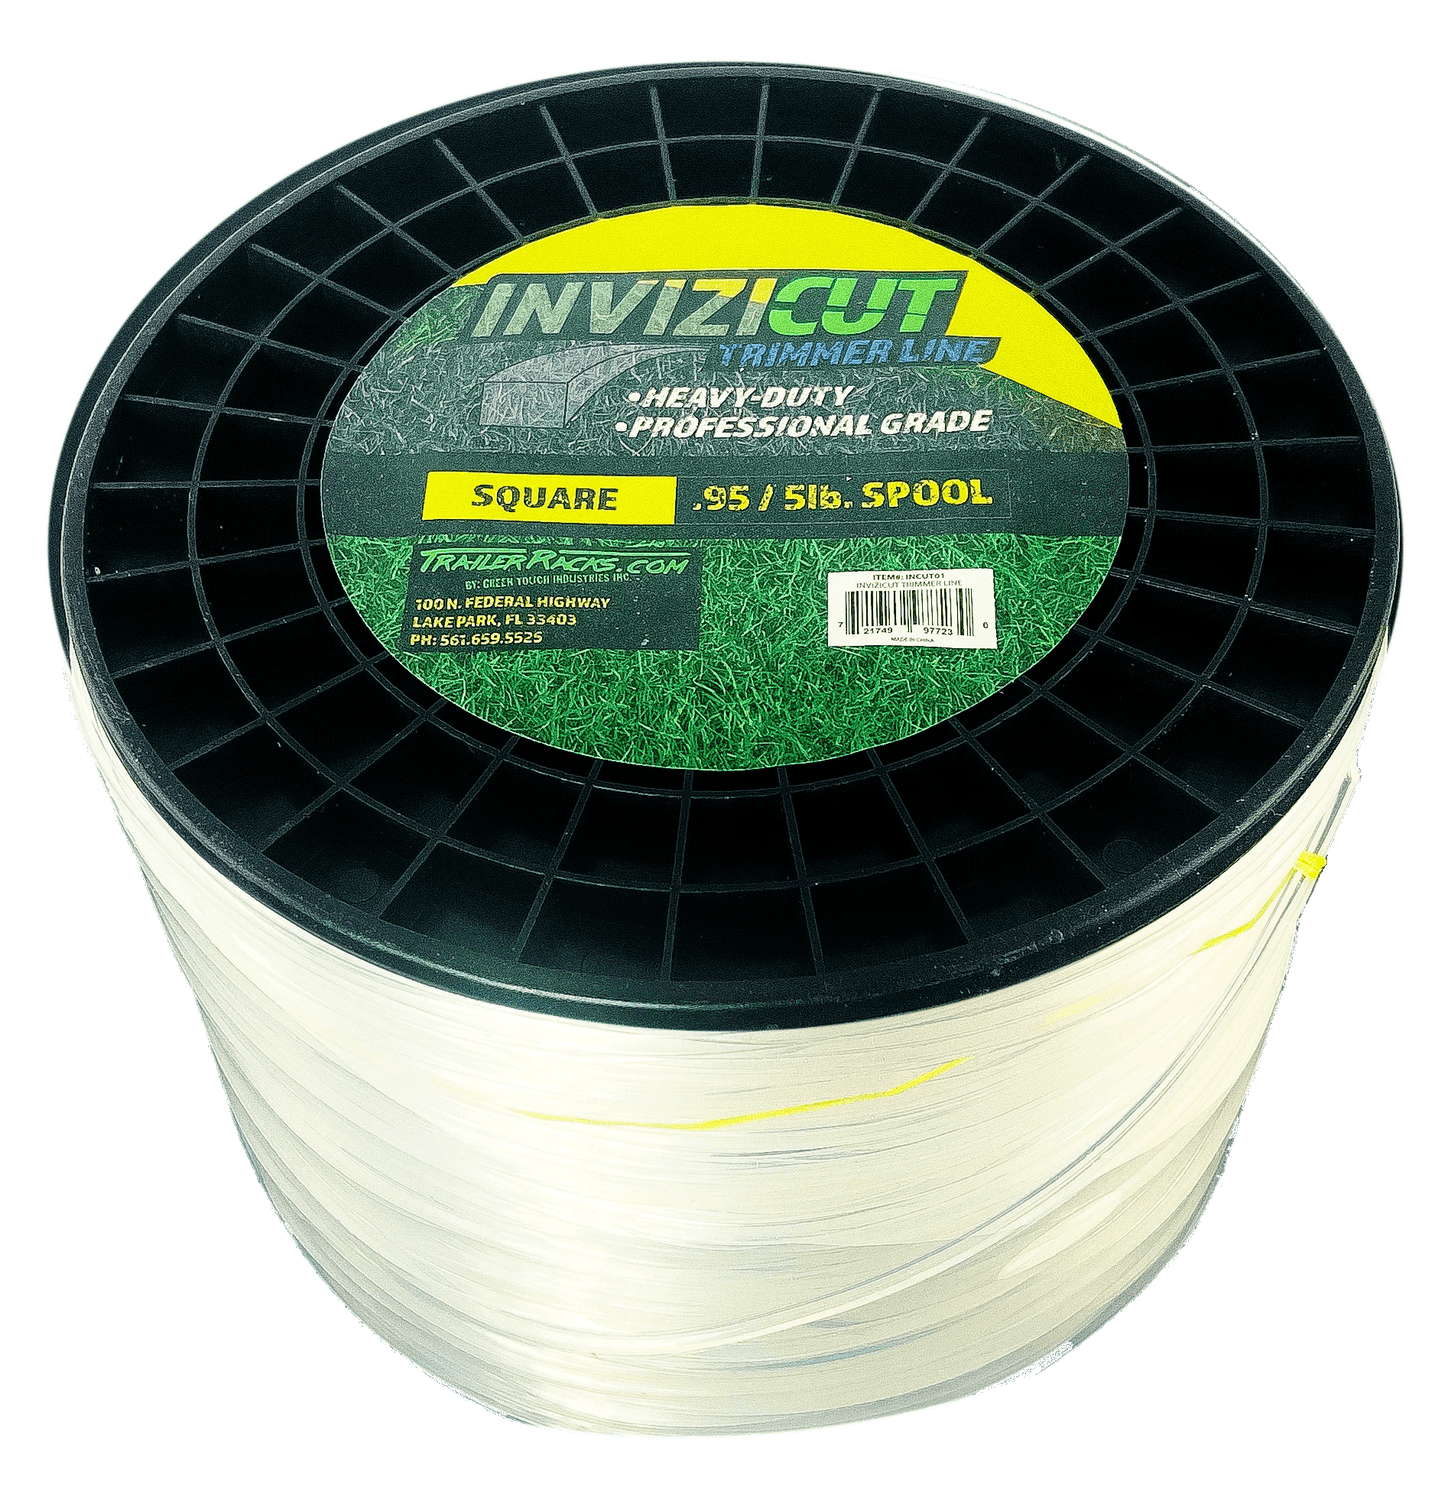 FREE SHIPPING | Precision Pro Pack | Universal Series | PPP45 | 4-pack of 5 LB Spools of Trimmer Line - TrailerRacks.com